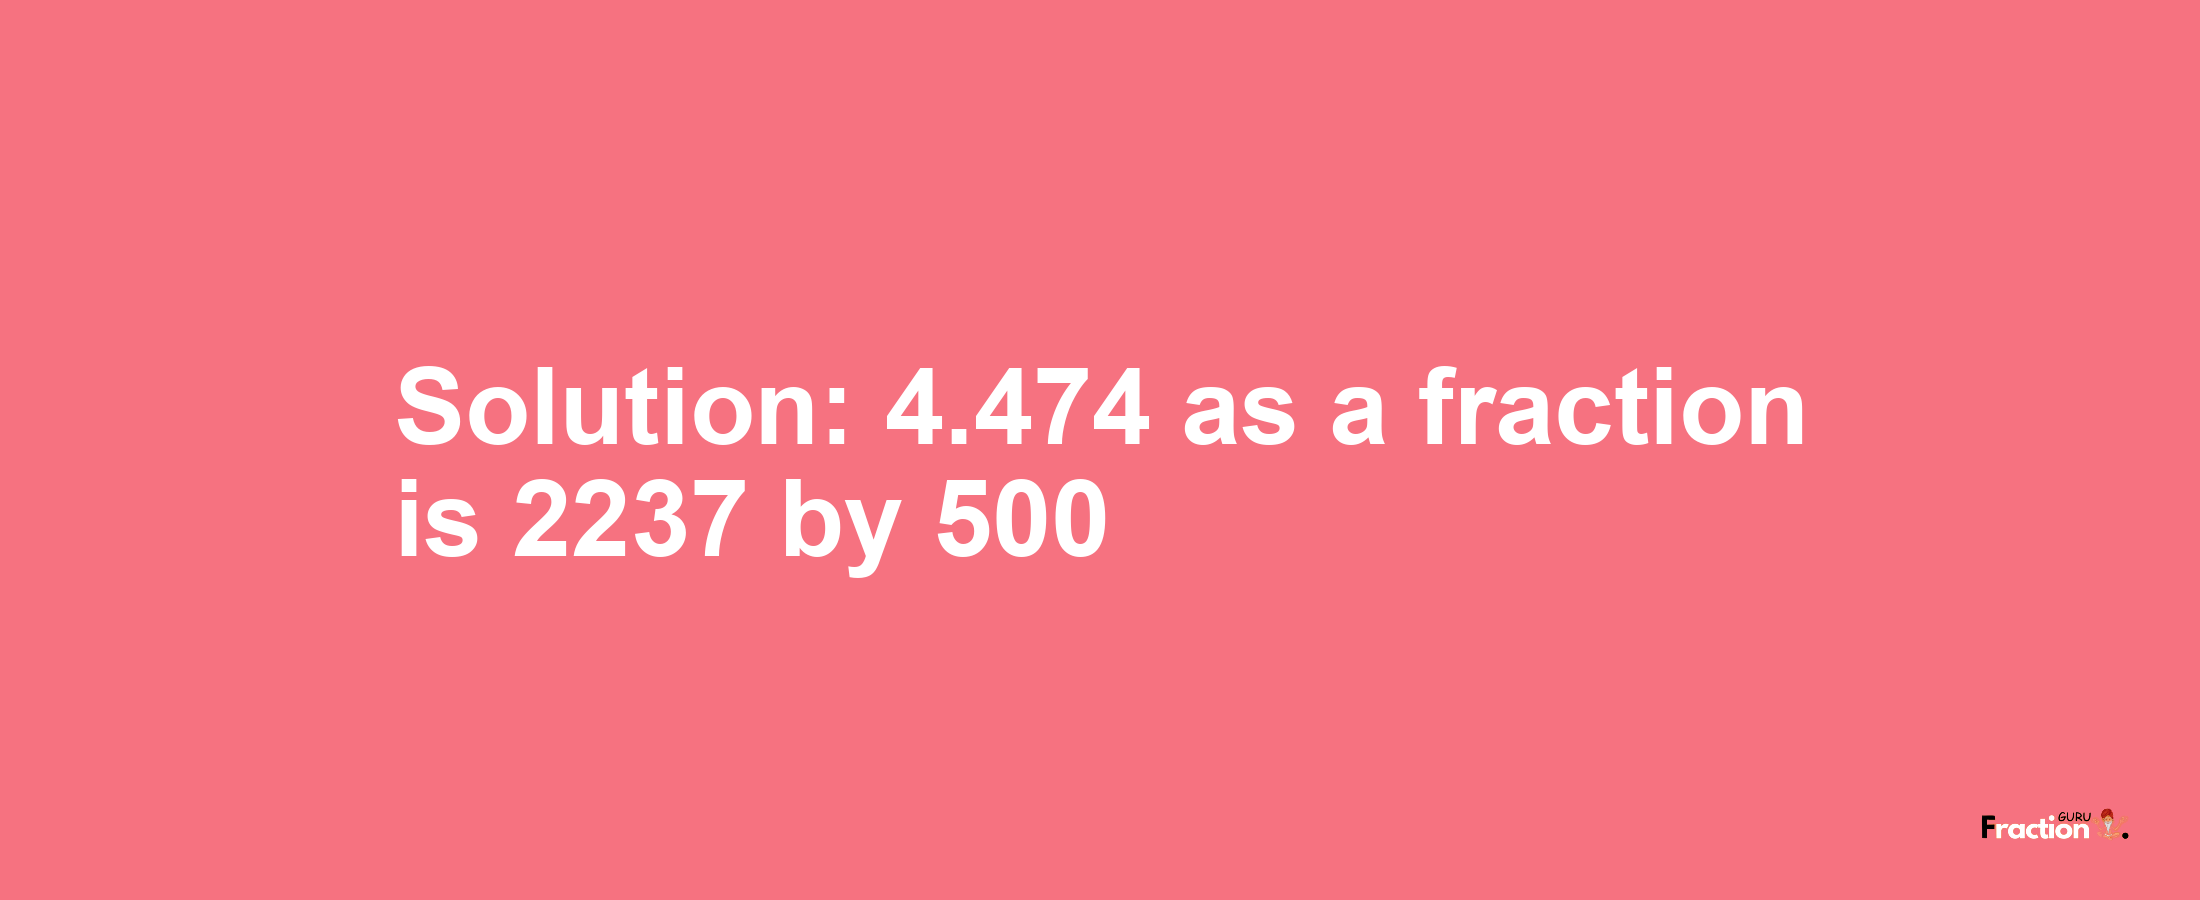 Solution:4.474 as a fraction is 2237/500